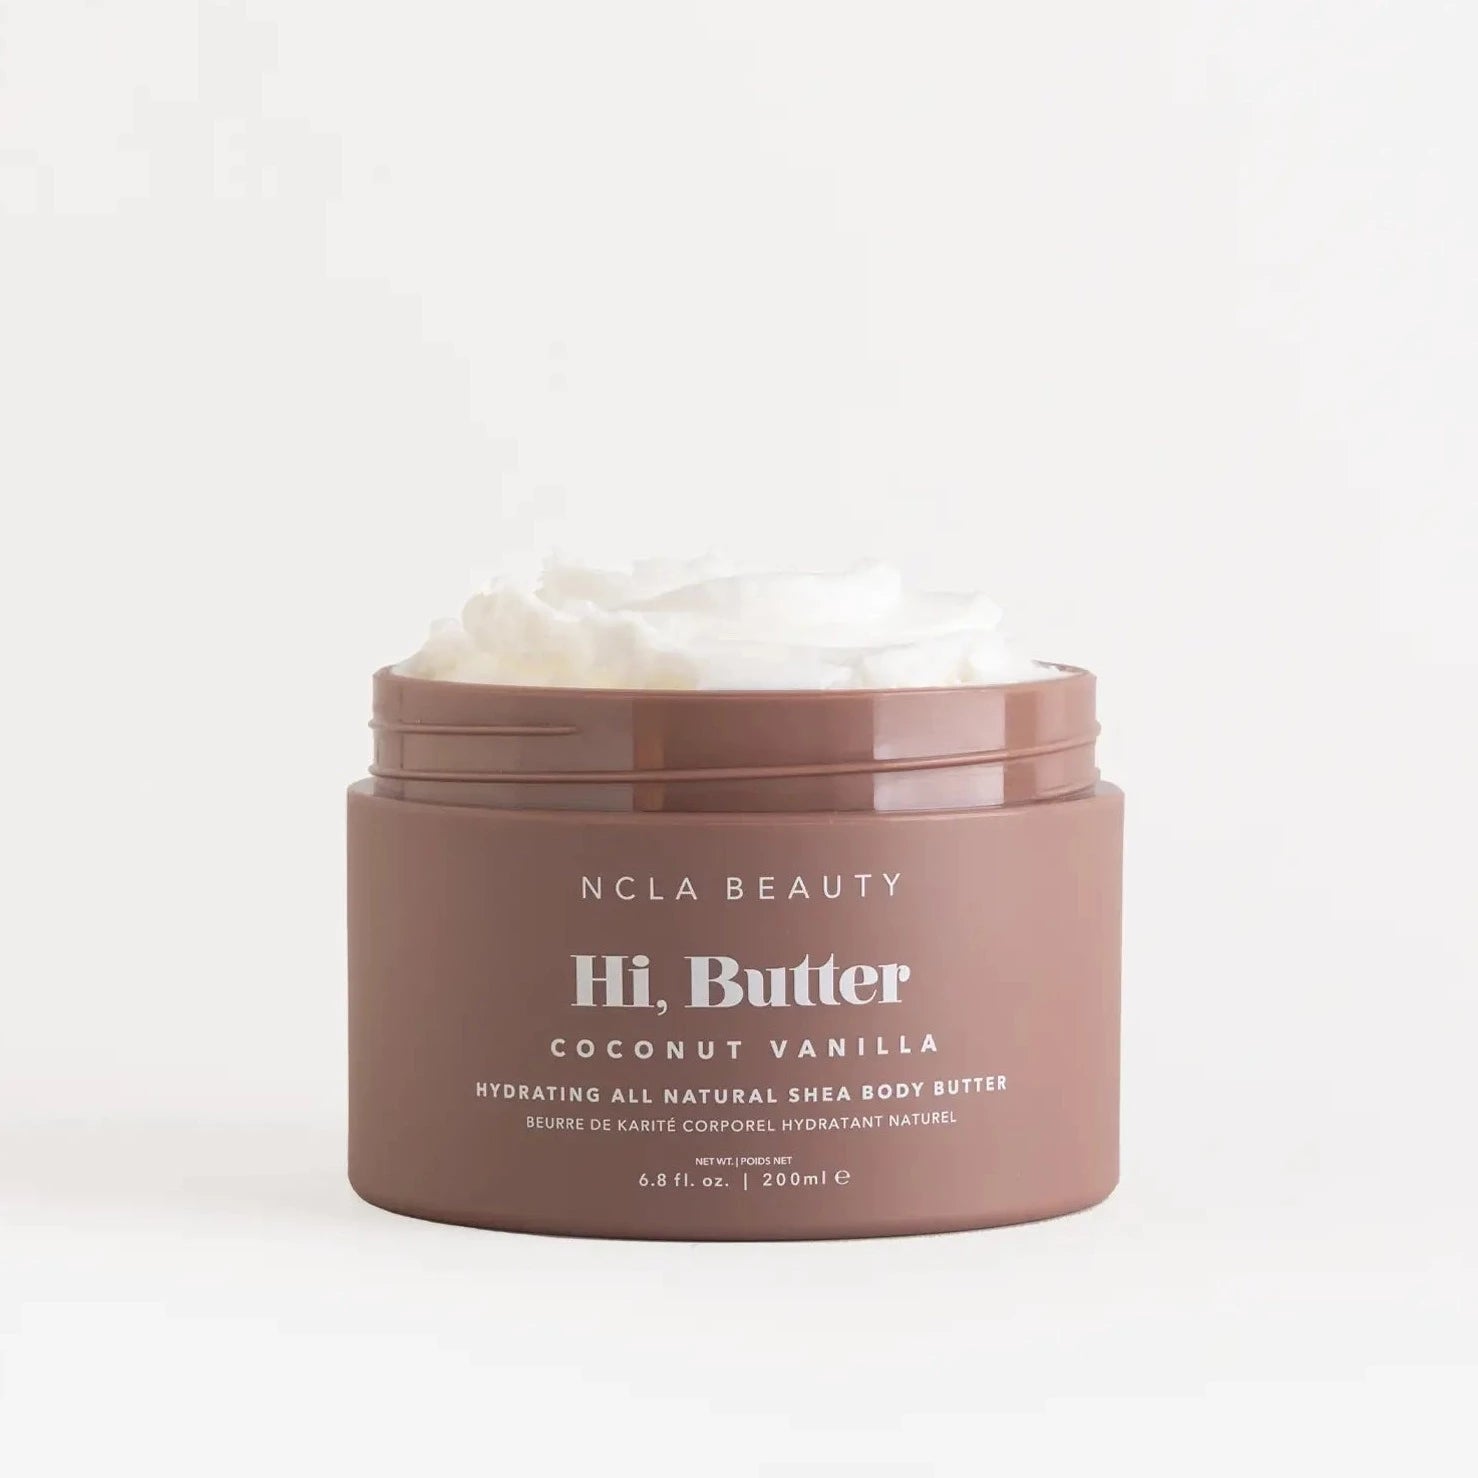 coconut vanilla body butter in brown container. the lid is off showing the whipped texture of the body butter